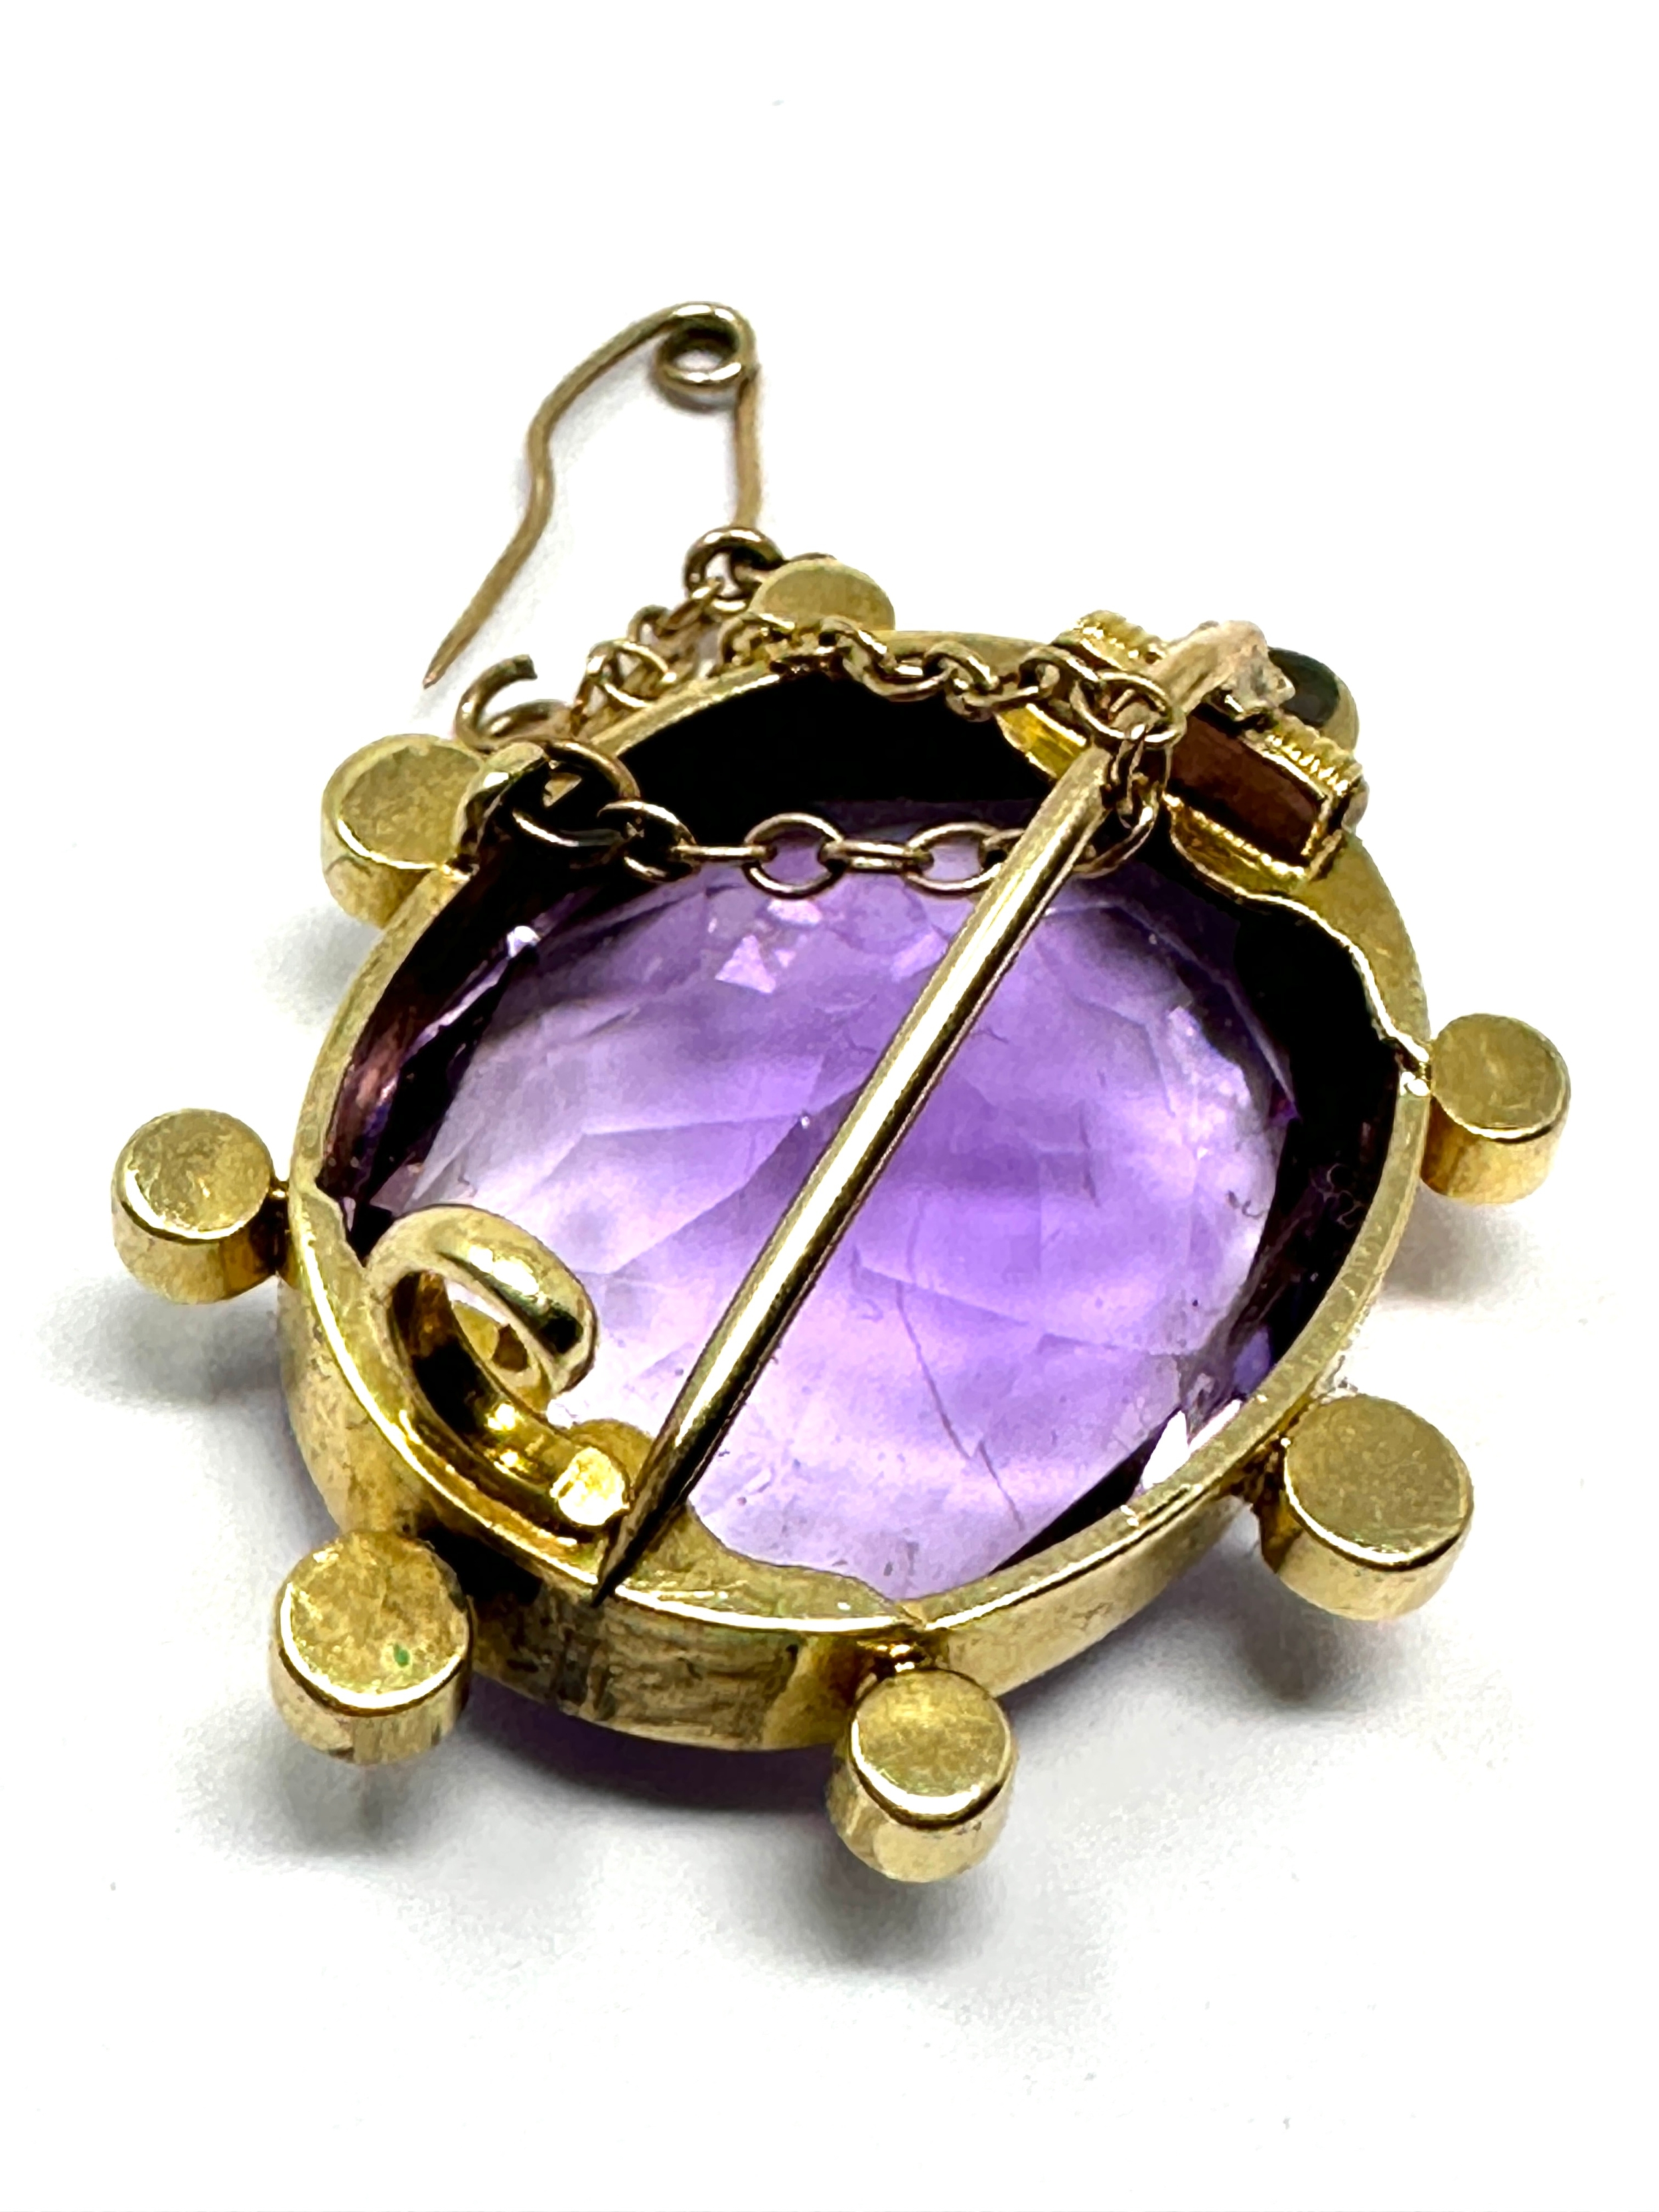 Fine gold amethyst & seed pearl brooch measures approx 2.8cm by 2.3cm weight 8.1g not hallmarked - Image 3 of 4